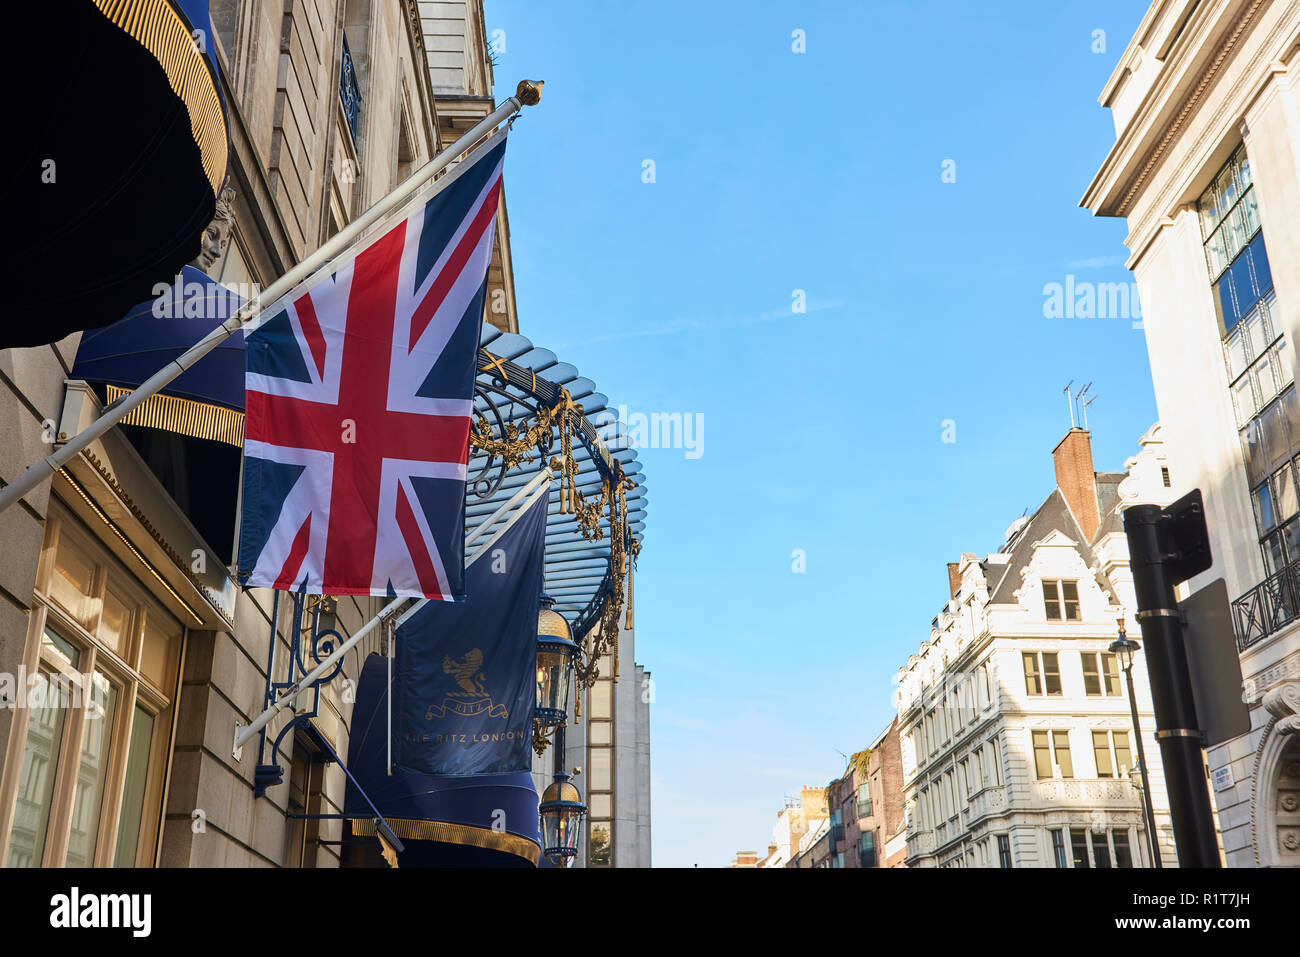 Arlington Street facing North, where the Ritz Hotel is located in London, UK. Stock Photo